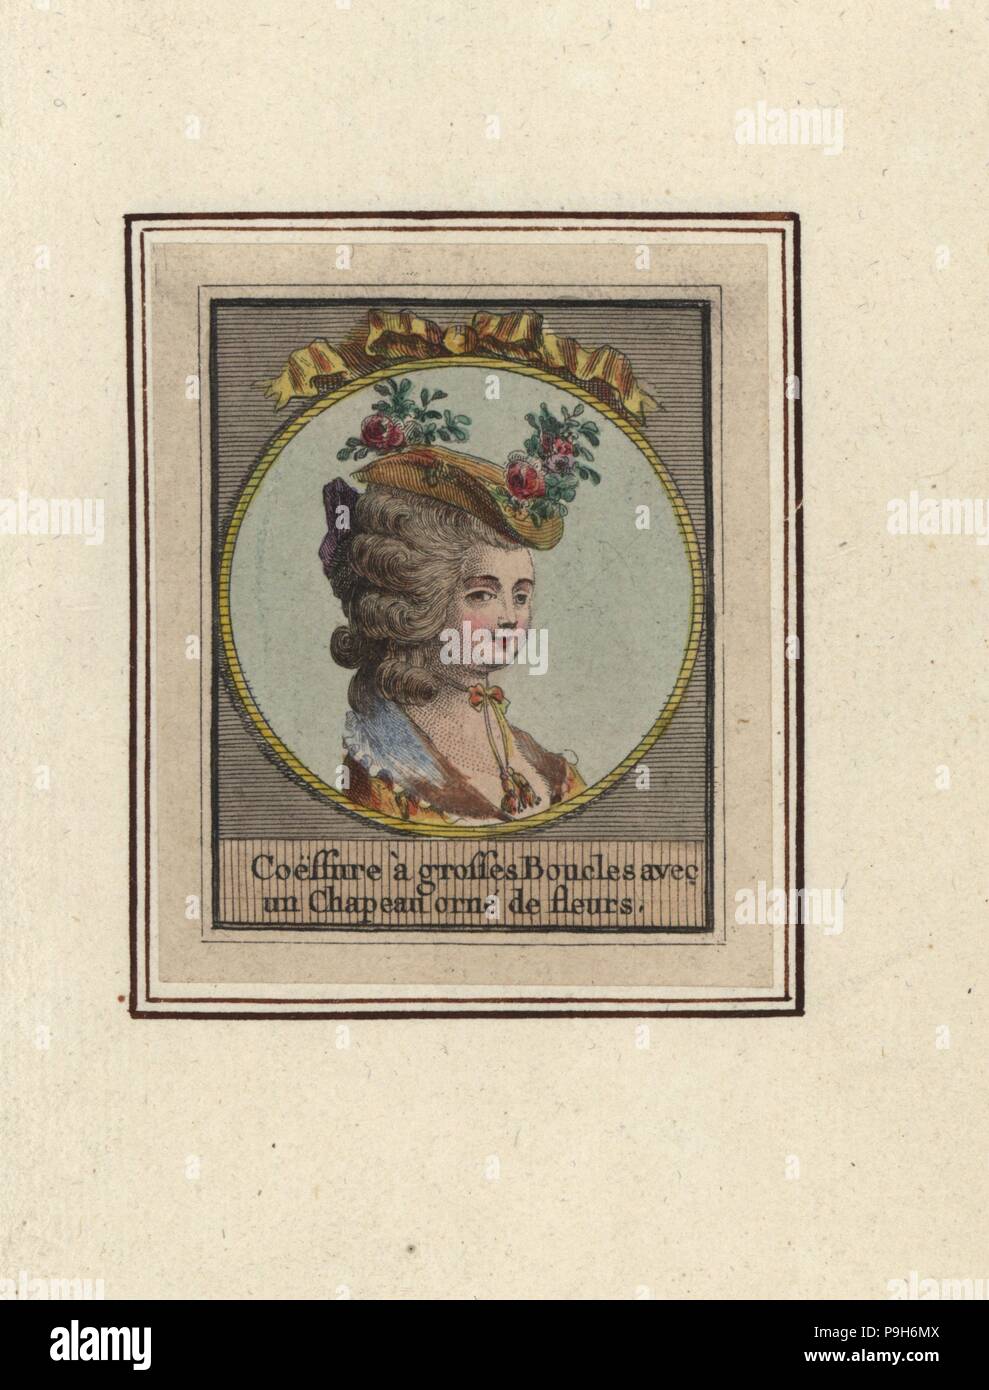 Woman in hairstyle with large curls and a straw hat decorated with flowers. Coeffure a grosses Boucles avec un Chapeau orne de fleurs. Handcoloured copperplate engraving by an unknown artist from an Album of Fashionable Hairstyles of 1783, Suite des Coeffures a la Mode en 1783, Esnauts et Rapilly, Paris, 1783. Stock Photo